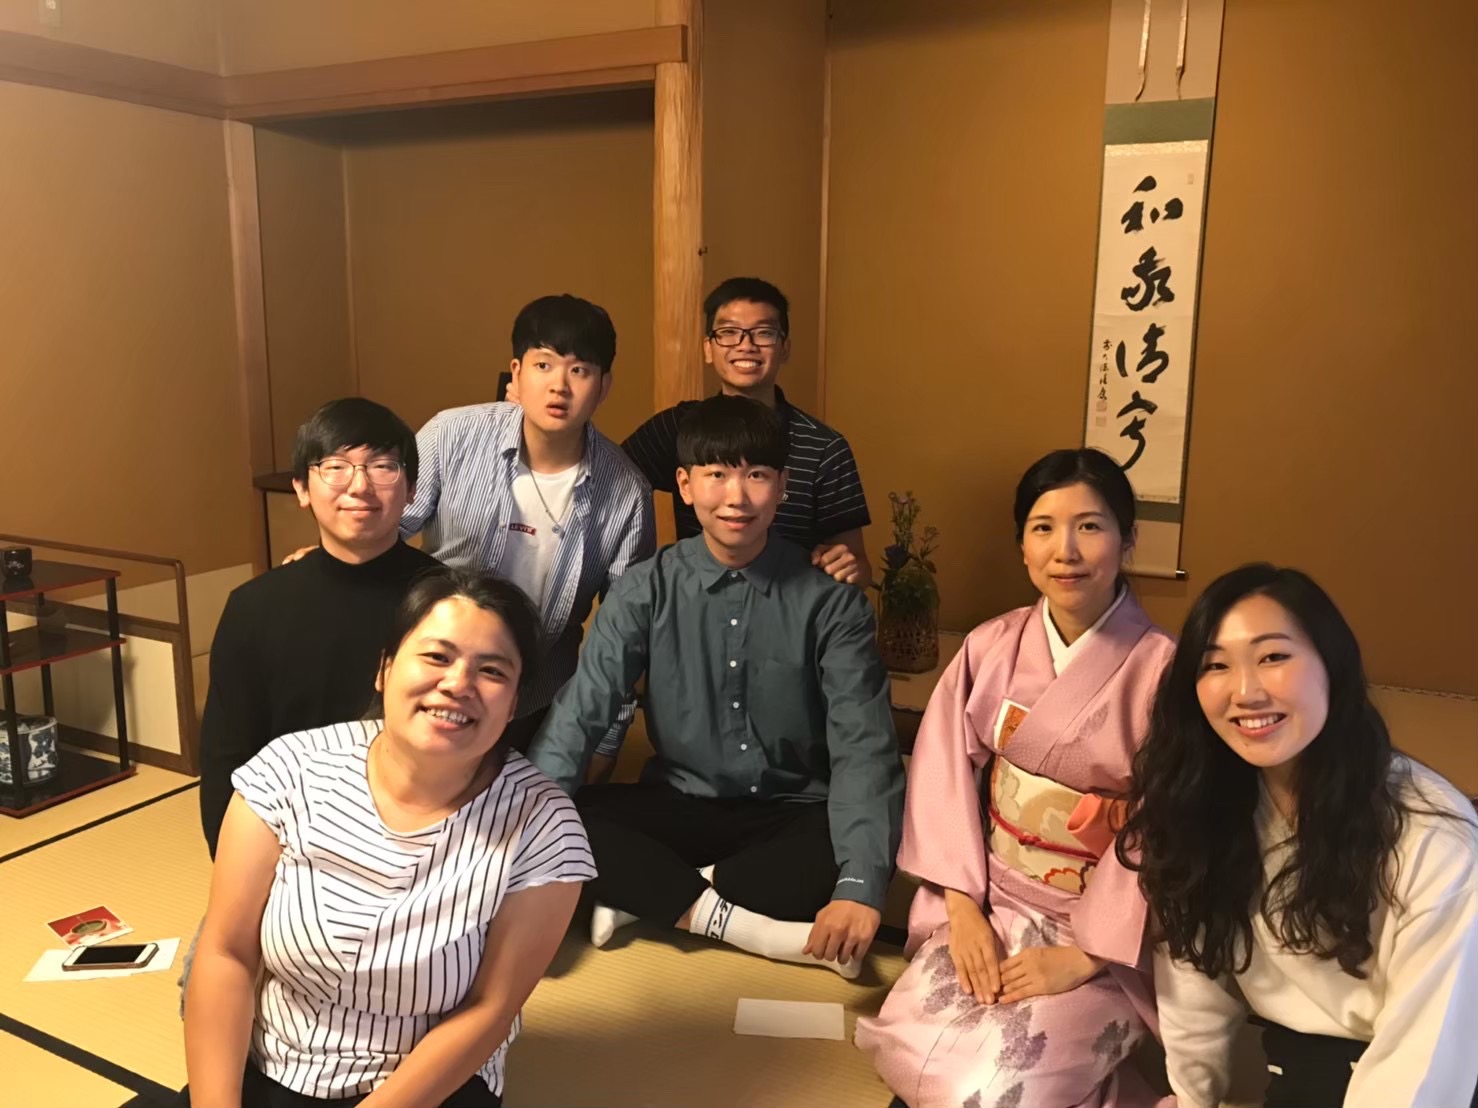 Senior international business and marketing major Jessica Ha (bottom right) studied Japanese culture and language at Senshu University in fall 2019 with the help of the Edythe Wiebers International Study Program Scholarship.